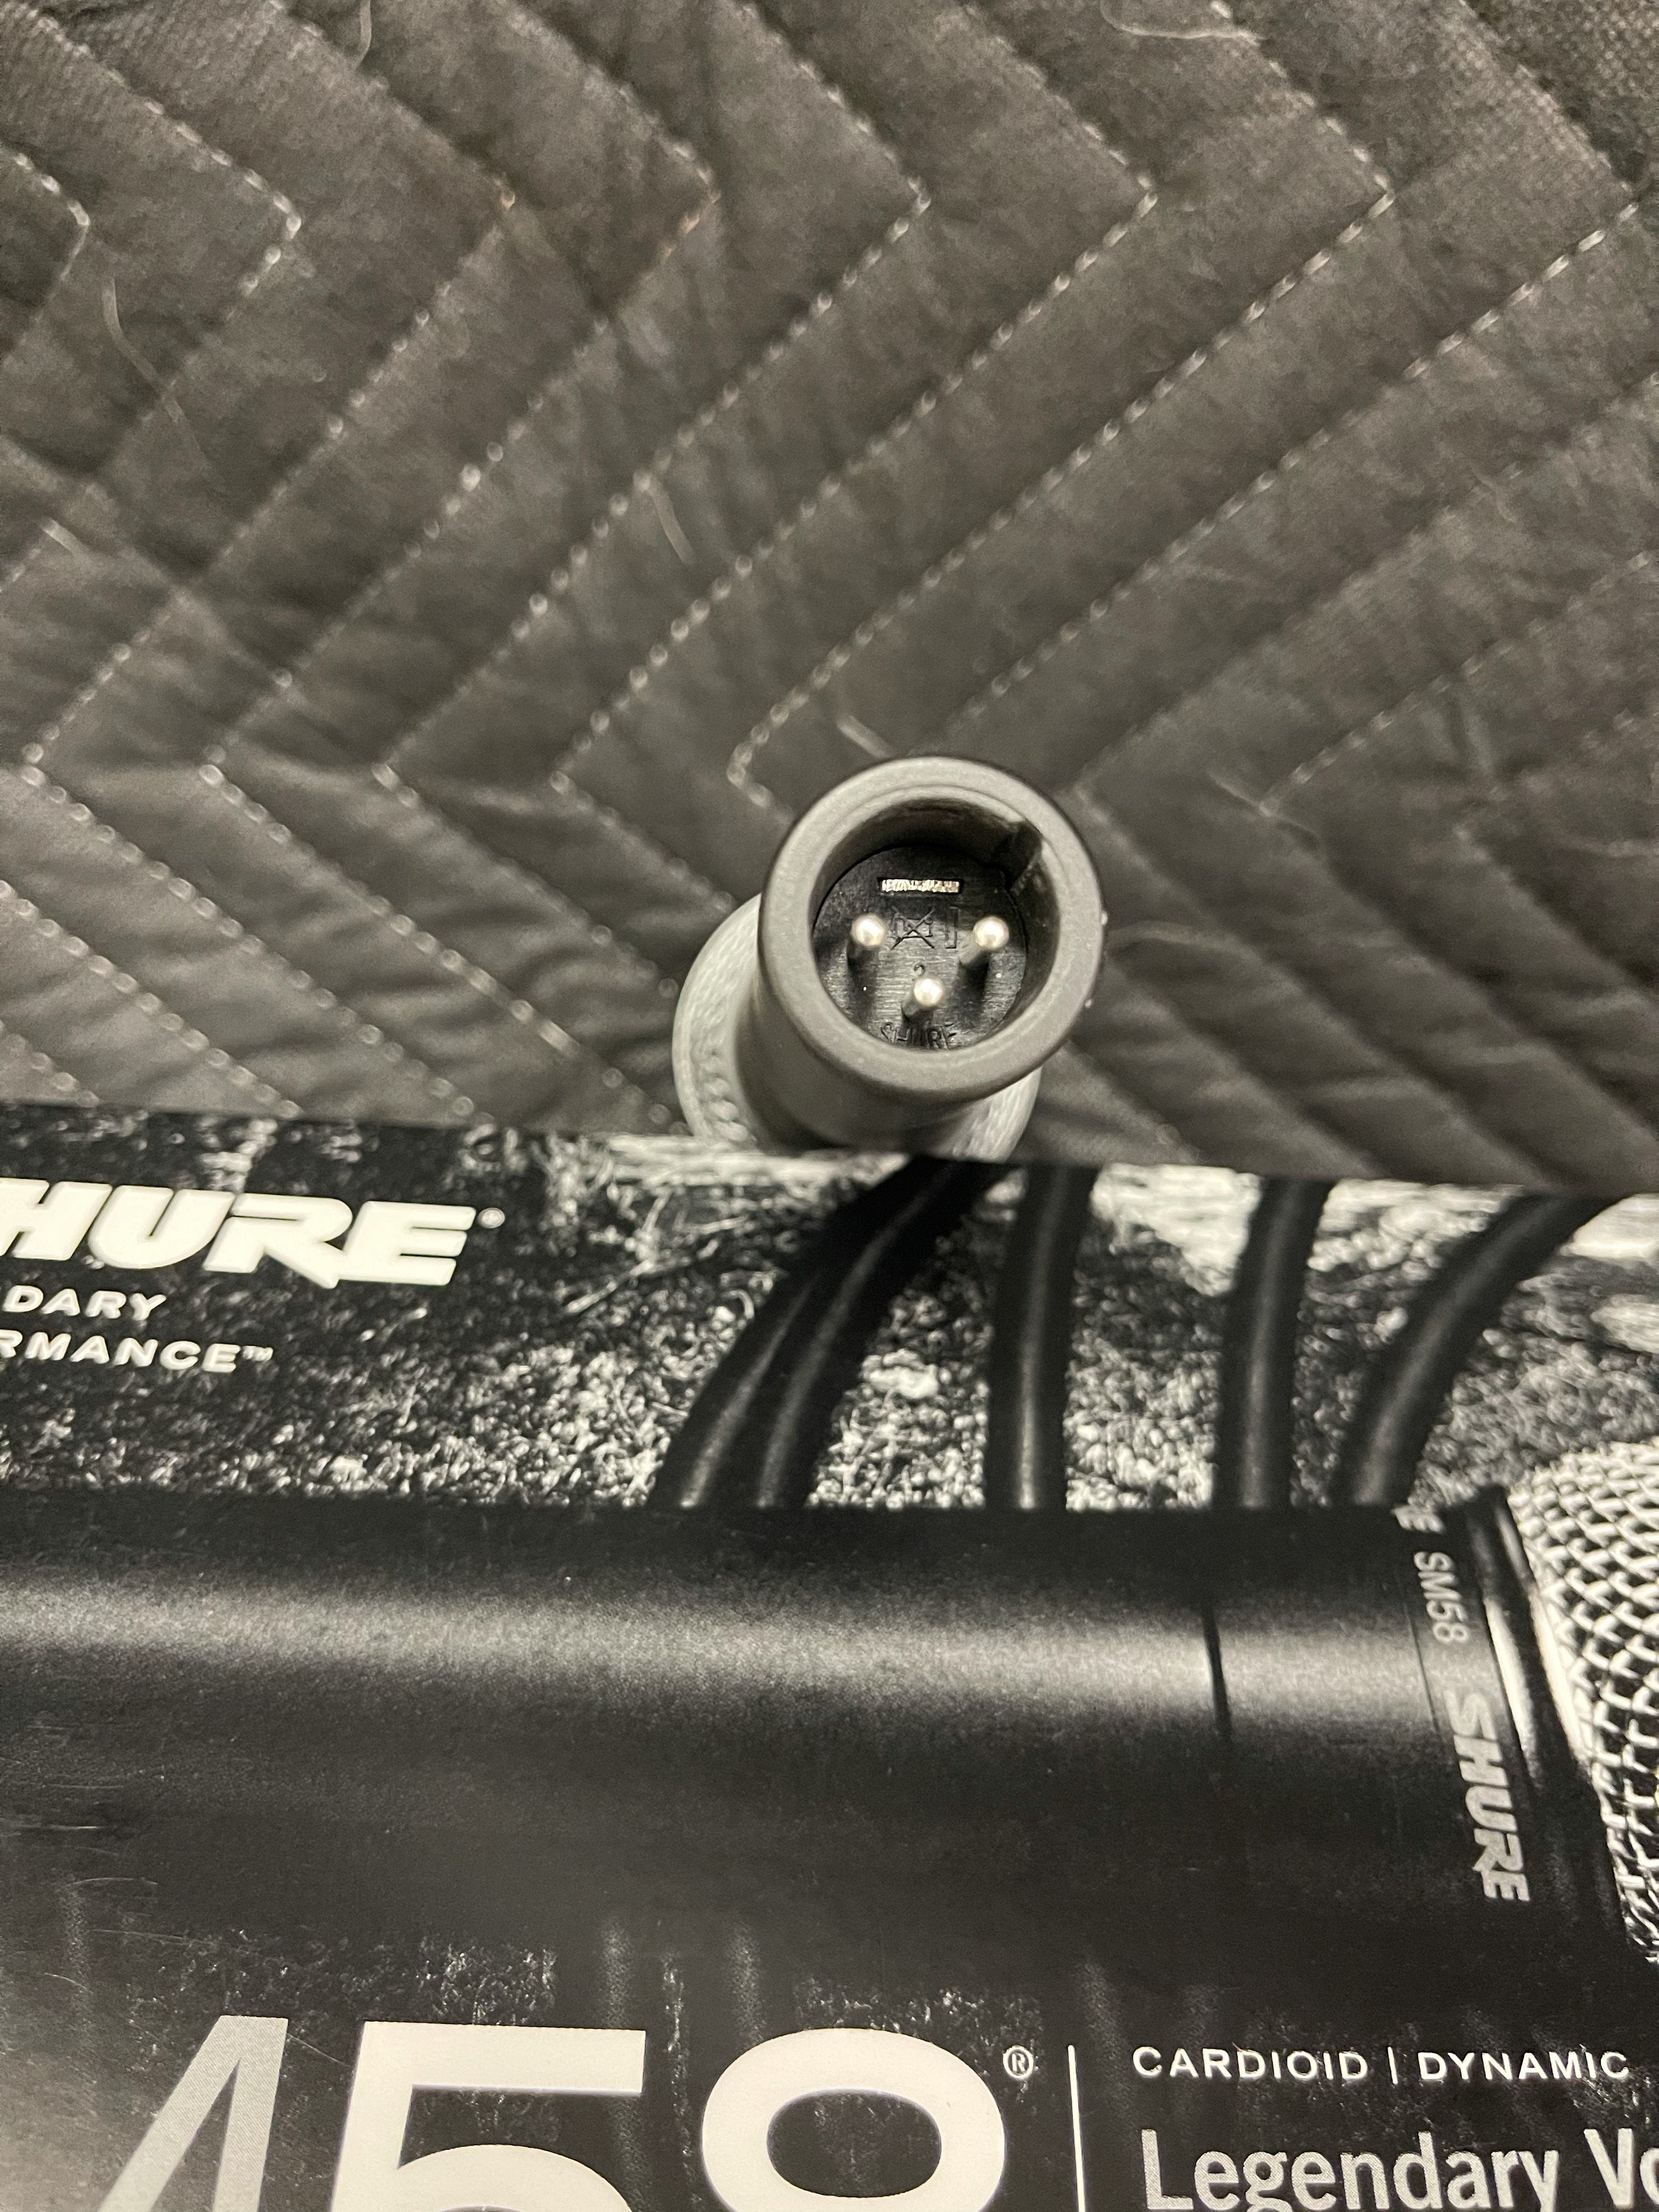 USED Shure SM58 LC